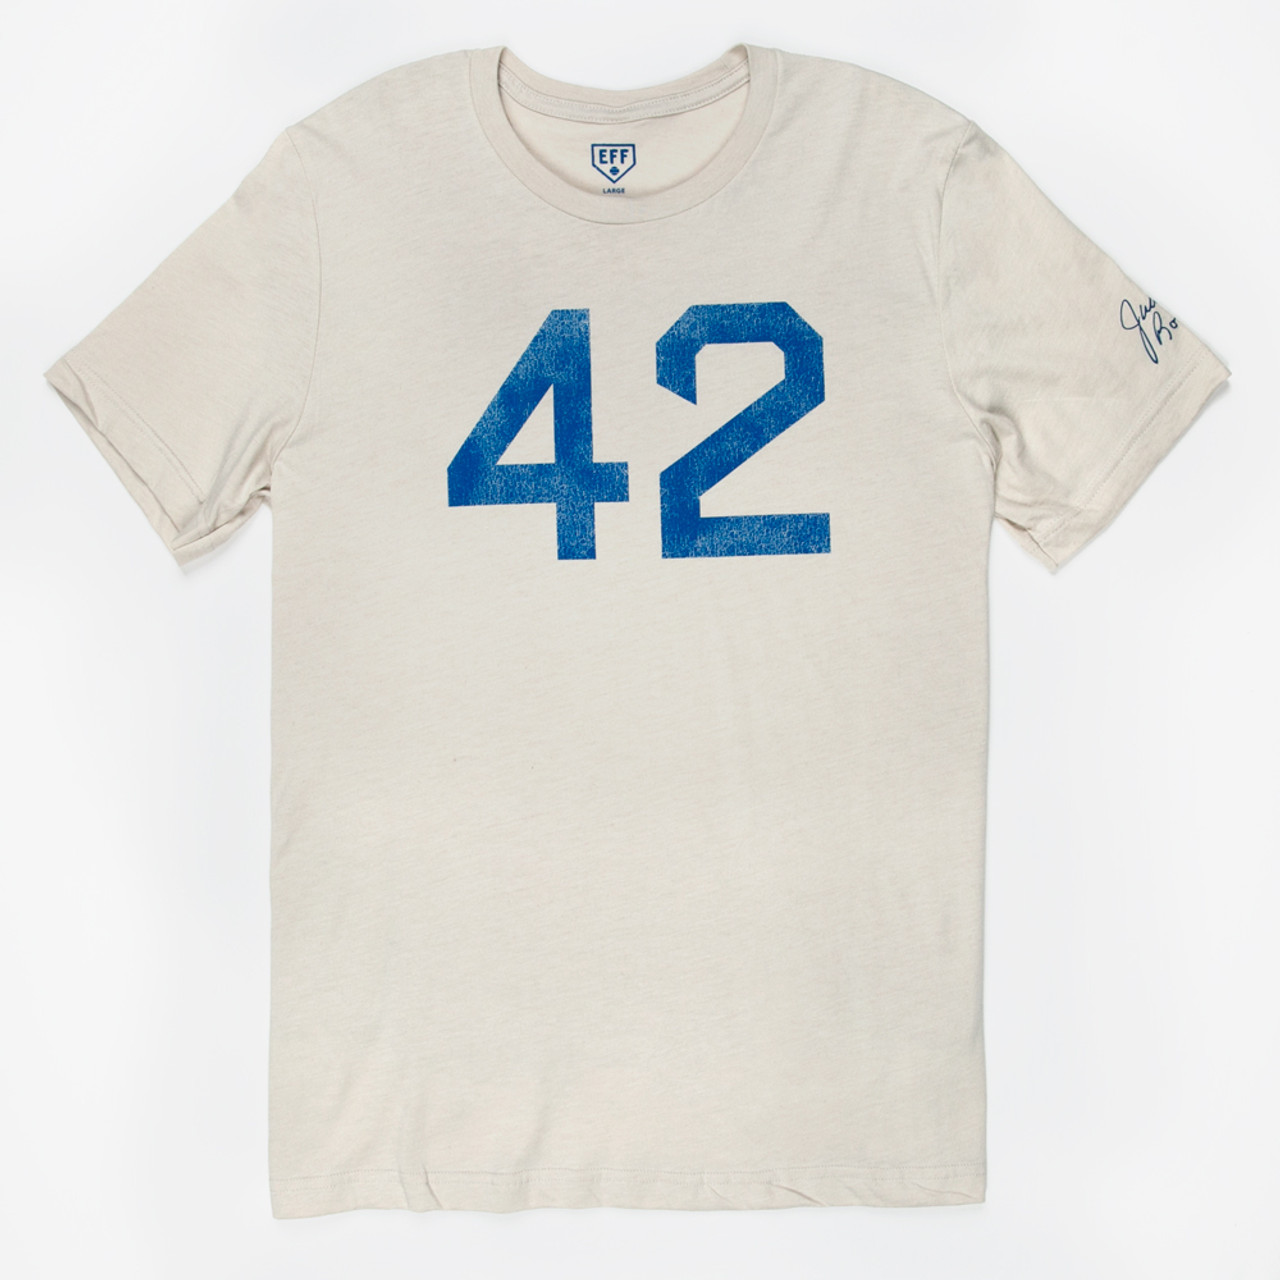 Shirts, Jackie Robinson Brooklyn Dodgers Jersey Size Mens Large